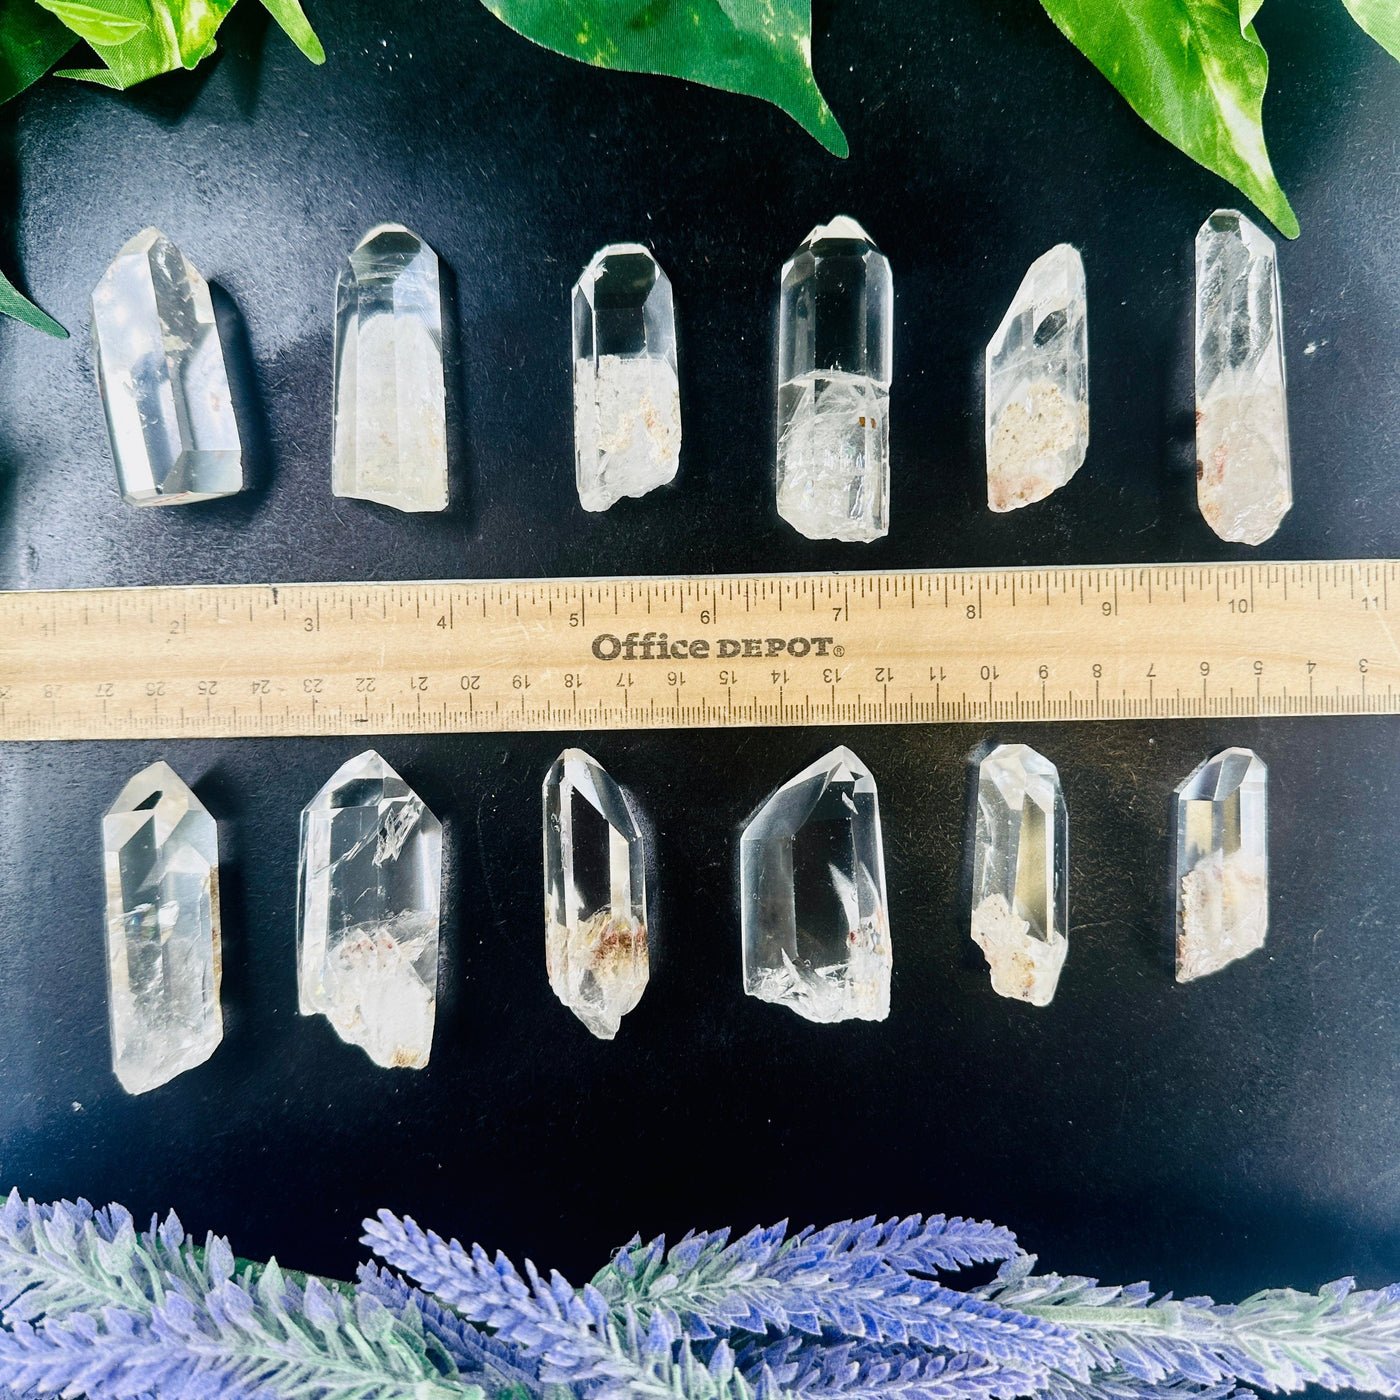 Crystal Quartz Point with Inclusions - High Quality - YOU CHOOSE all variants with ruler for size reference